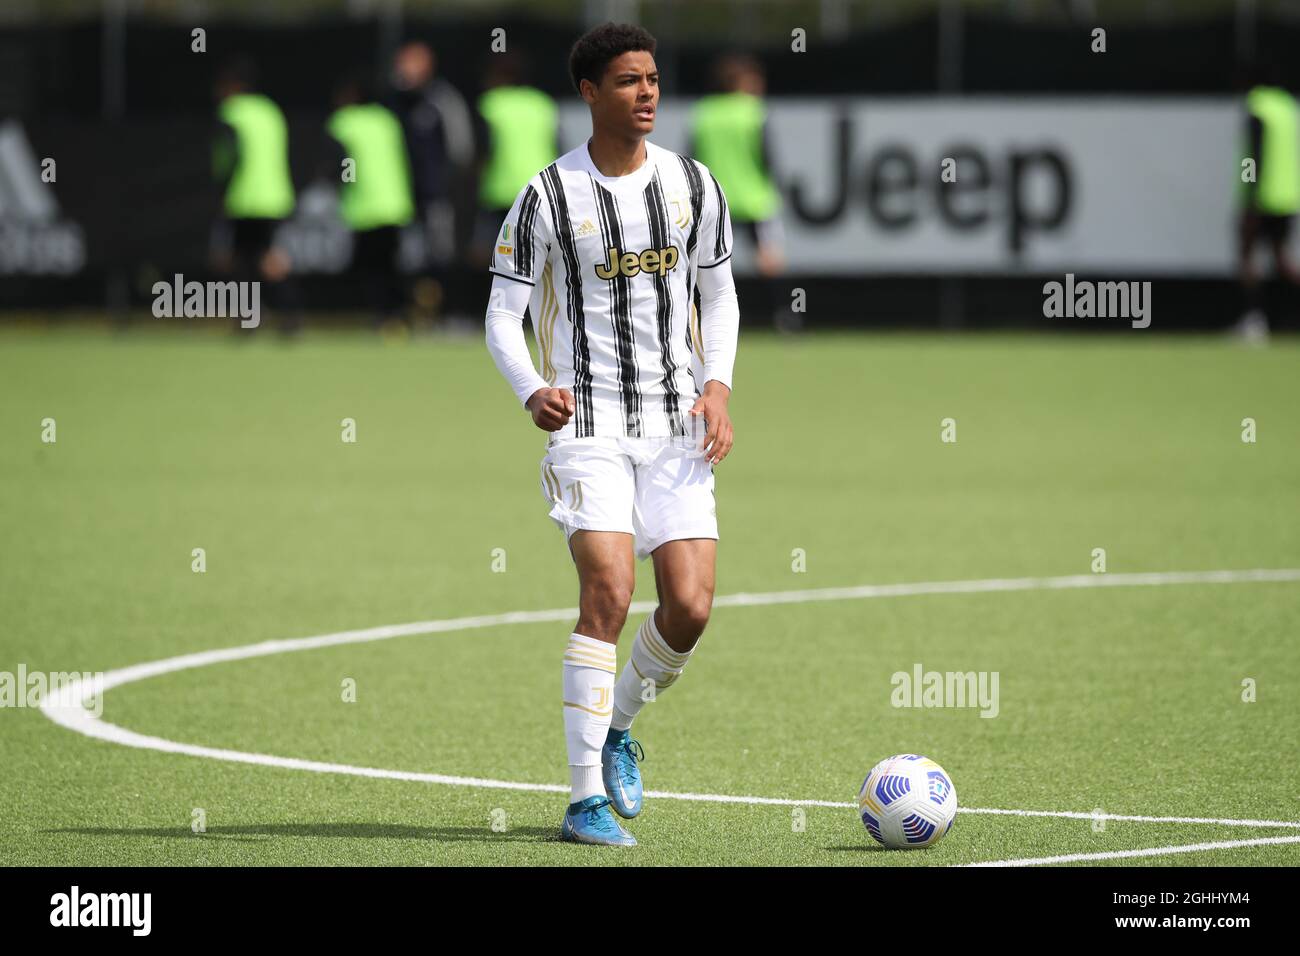 Vinovo, Italy, 17th April 2021. Koni De Winter of Juventus during the Primavera 1 match at the Juventus Center, Vinovo. Picture credit should read: Jonathan Moscrop / Sportimage via PA Images Stock Photo